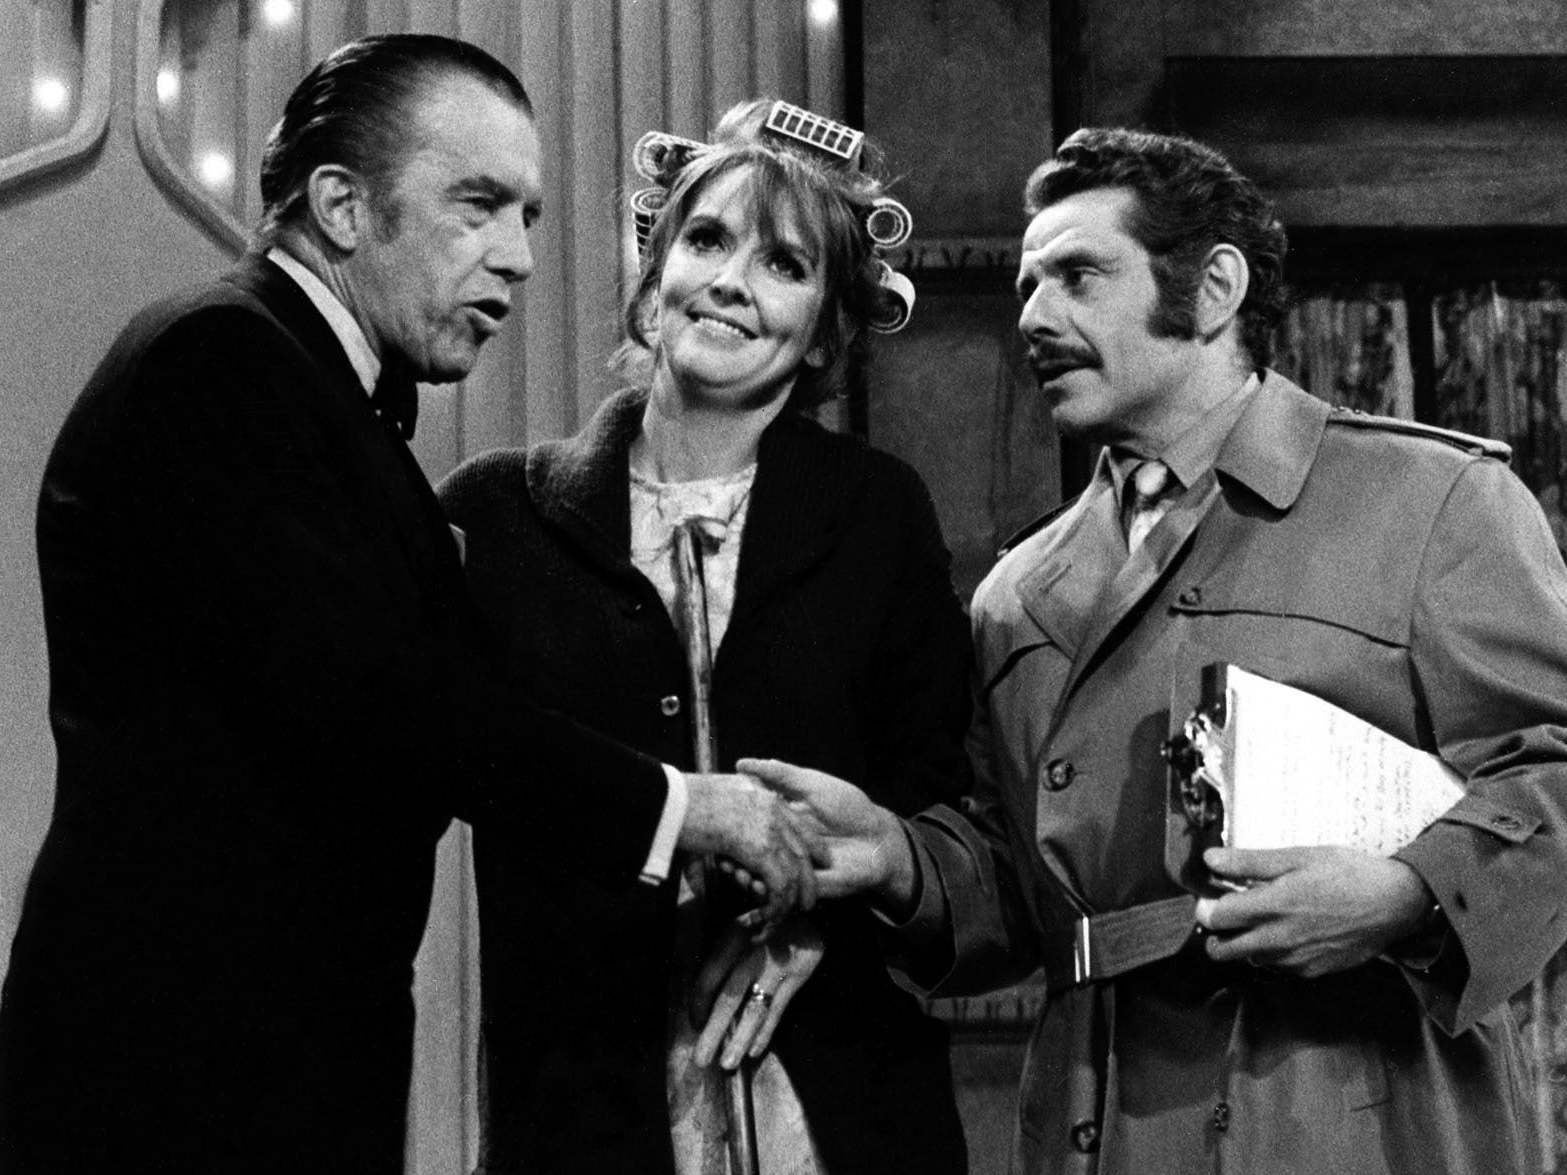 With his wife and comedy partner Anne Meara on ‘The Ed Sullivan Show’ in 1970